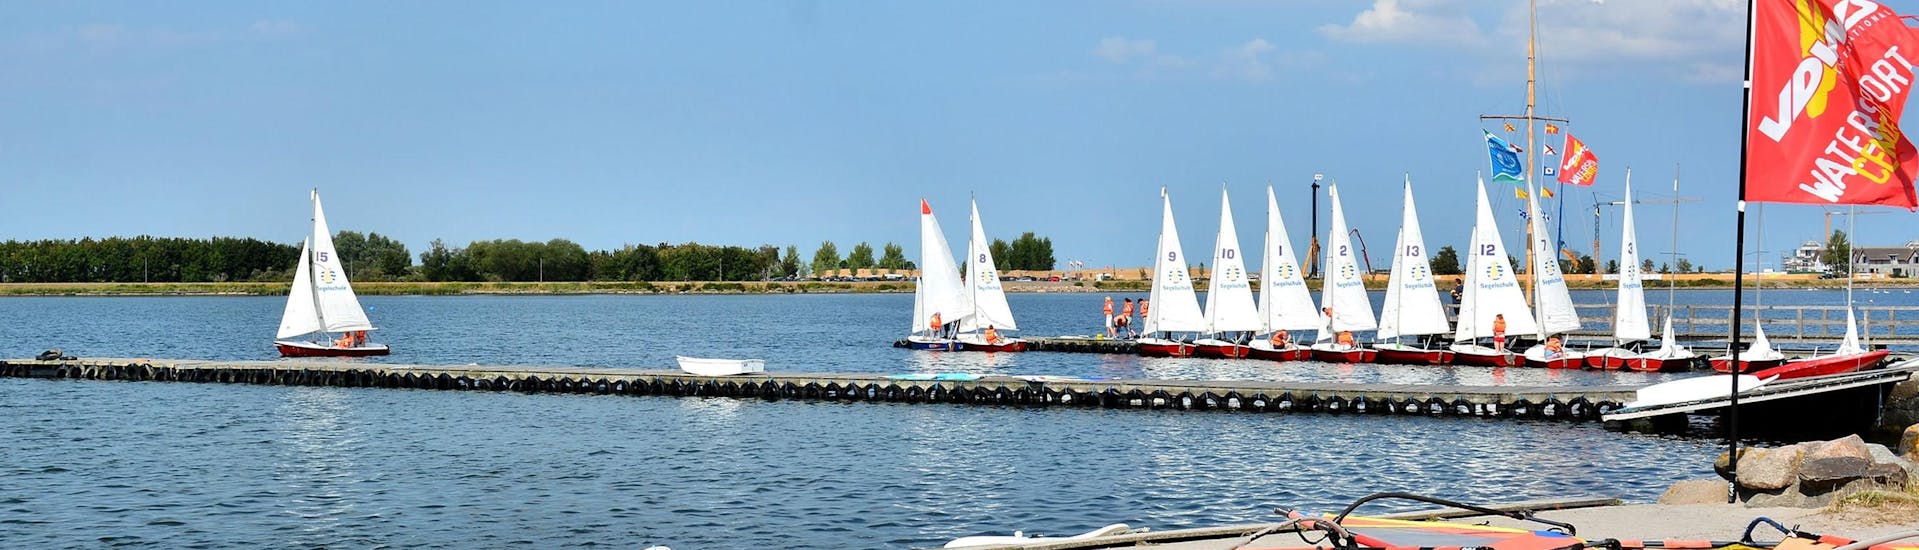 A view of the lake with several boats during Windsurfing Lessons for Advanced - Heiligenhafen with Wassersportcenter Heiligenhafen.